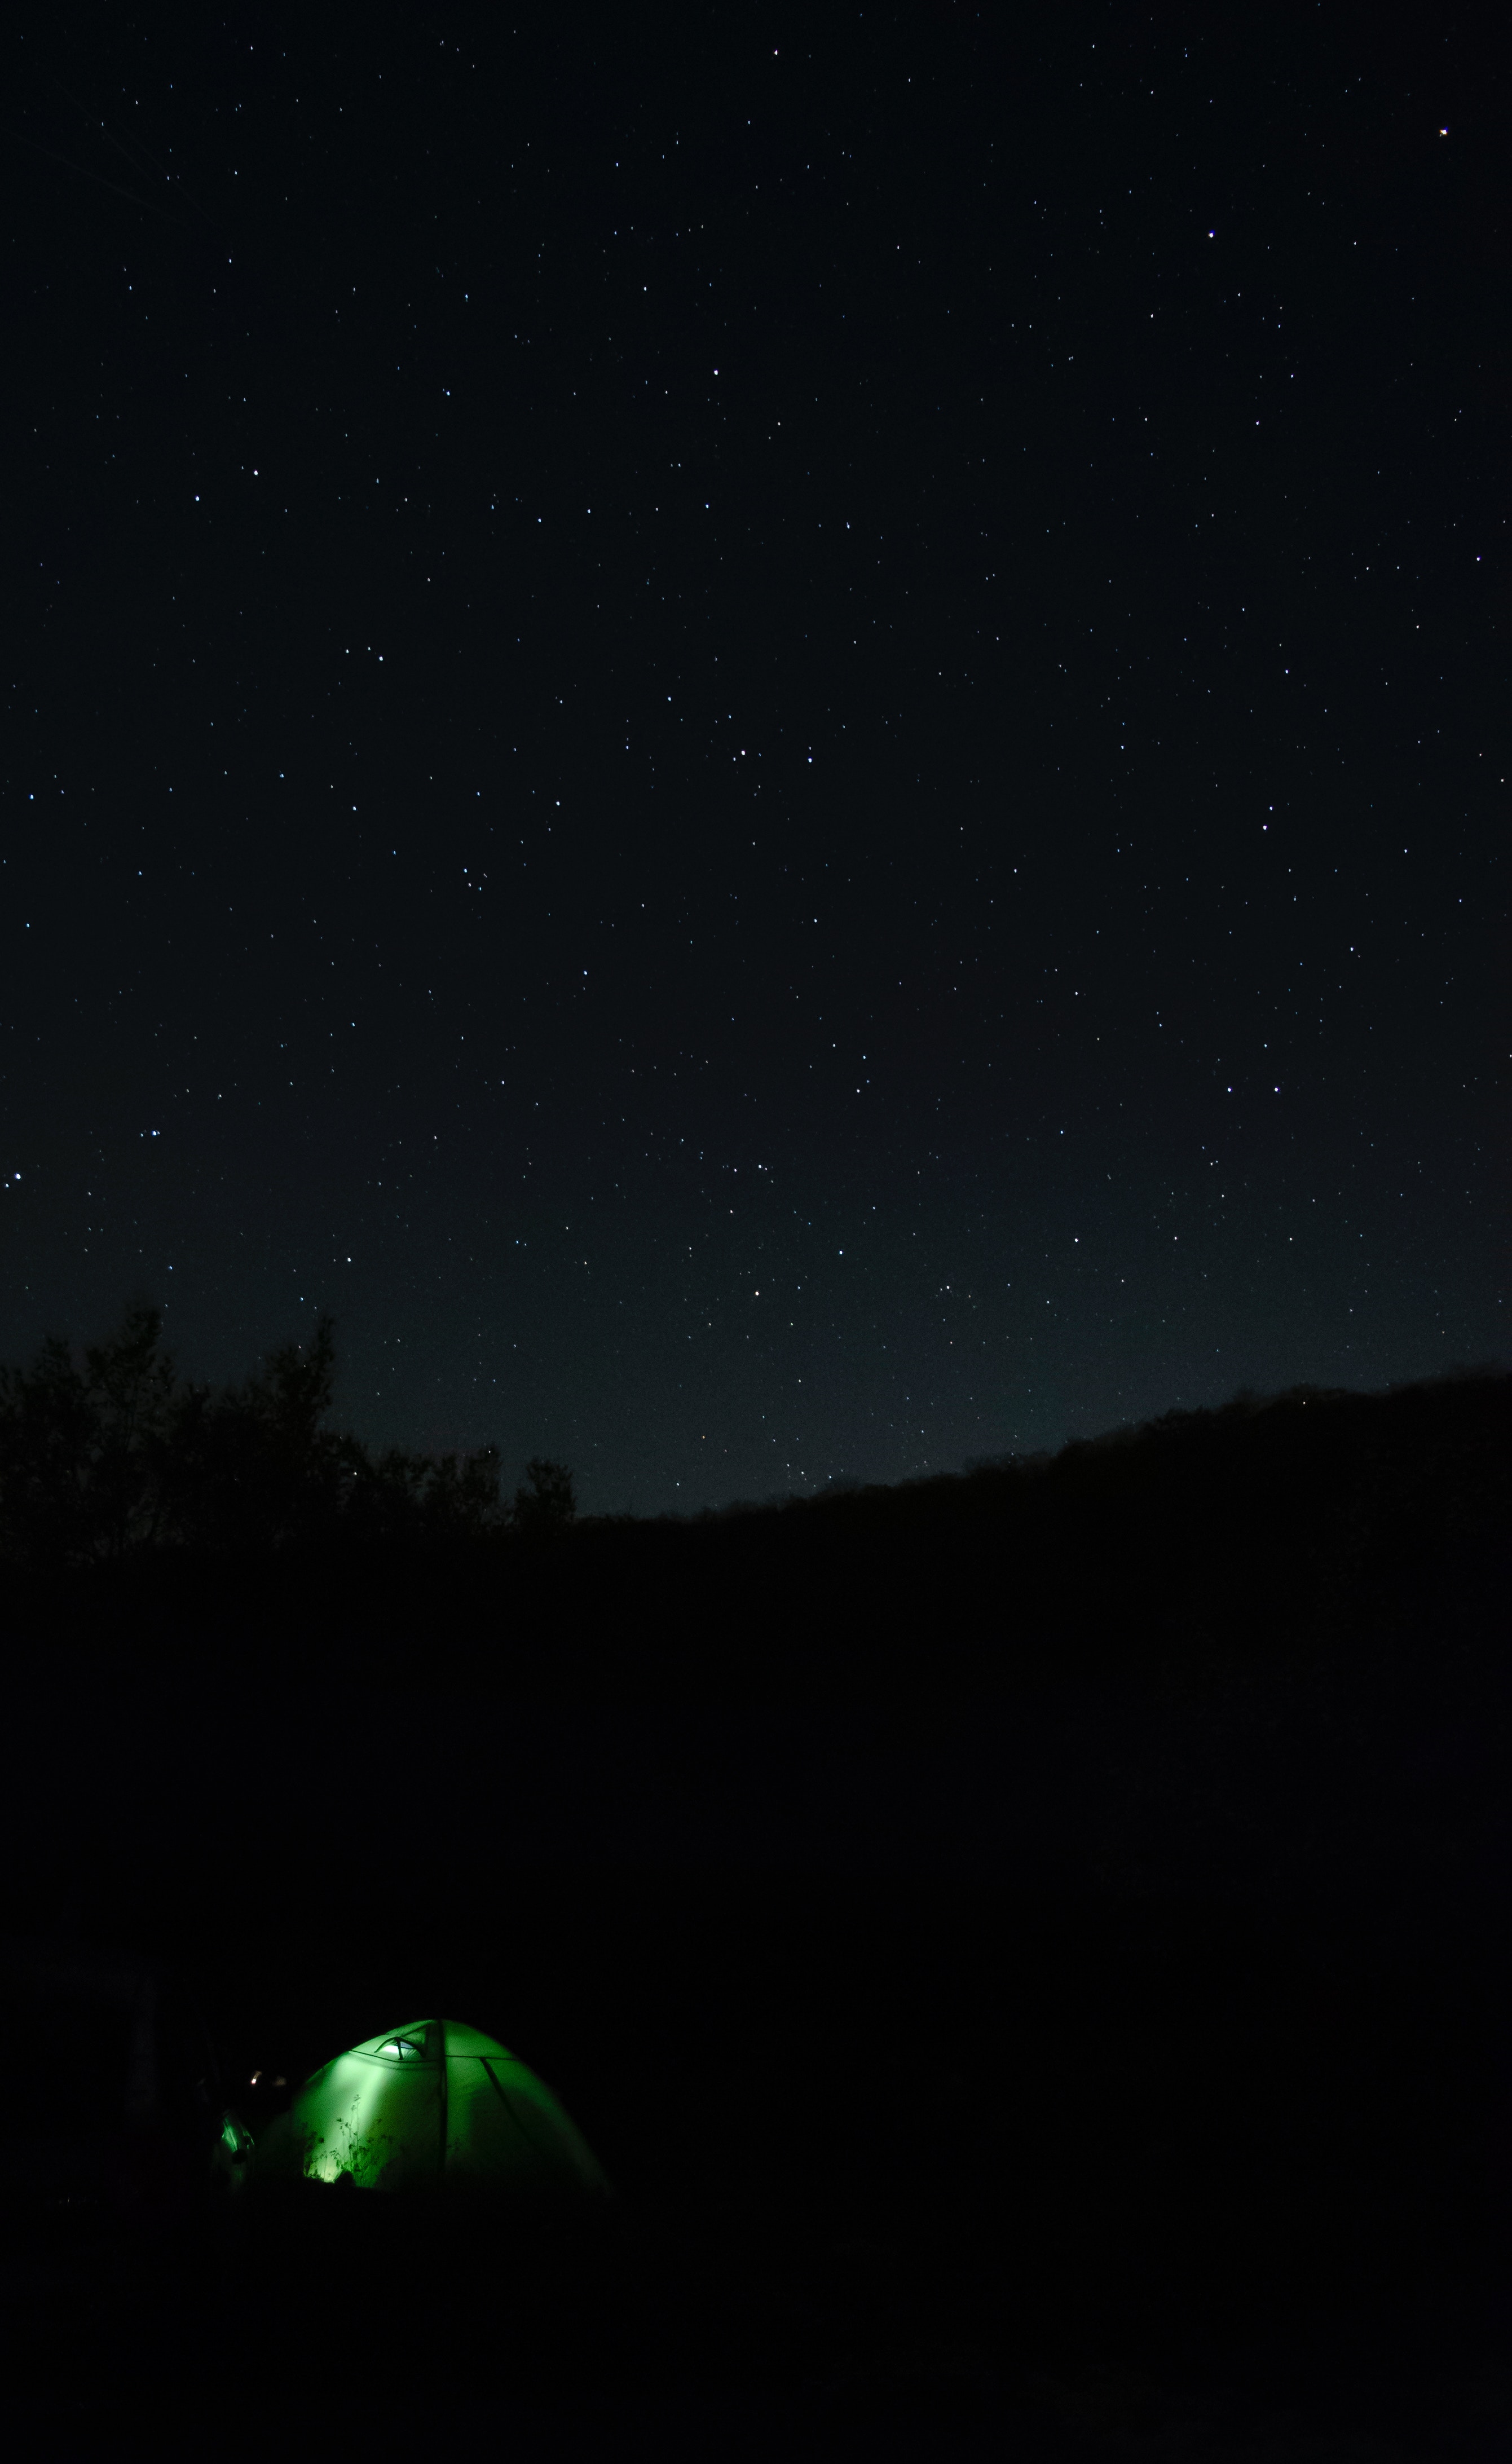 campsite, night, black, starry sky, darkness, tent, camping